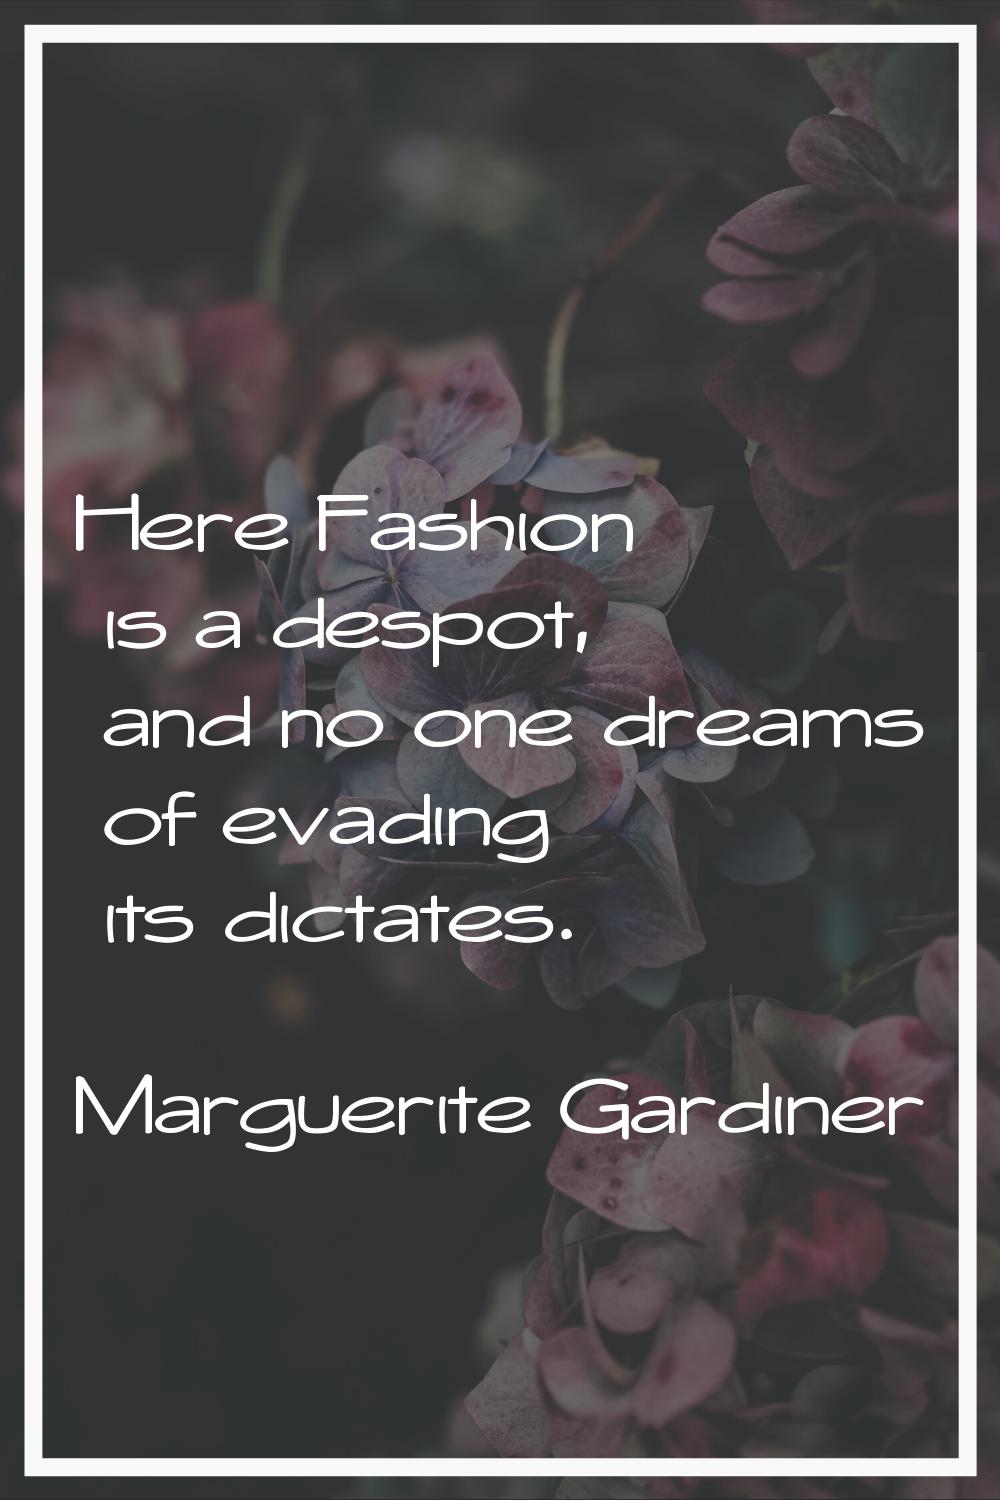 Here Fashion is a despot, and no one dreams of evading its dictates.